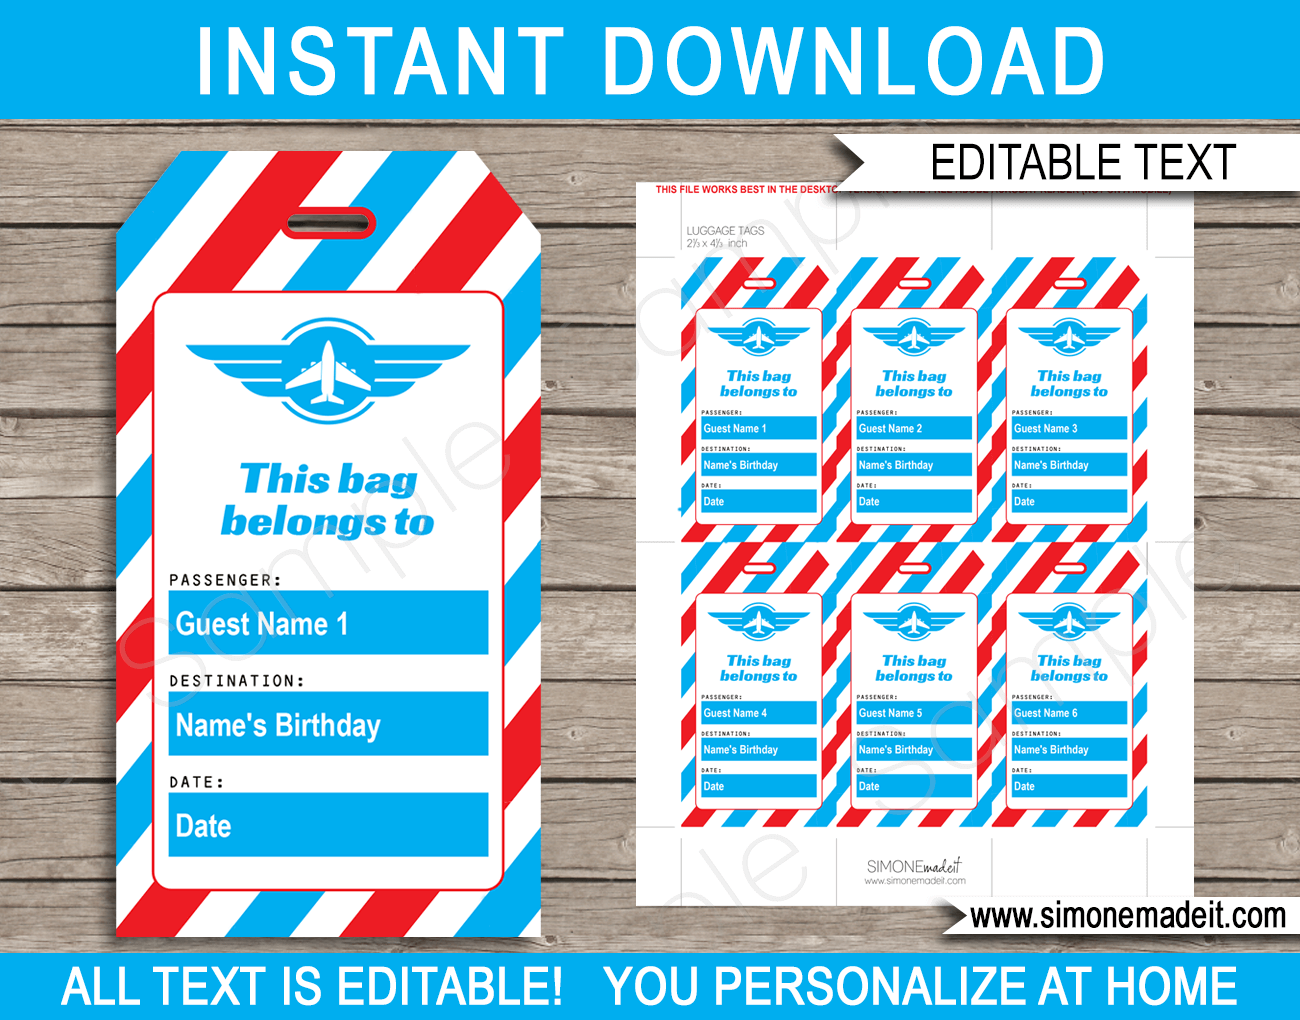 https://www.simonemadeit.com/wp-content/uploads/edd/2015/08/Airplane-Party-Luggage-Tags.png